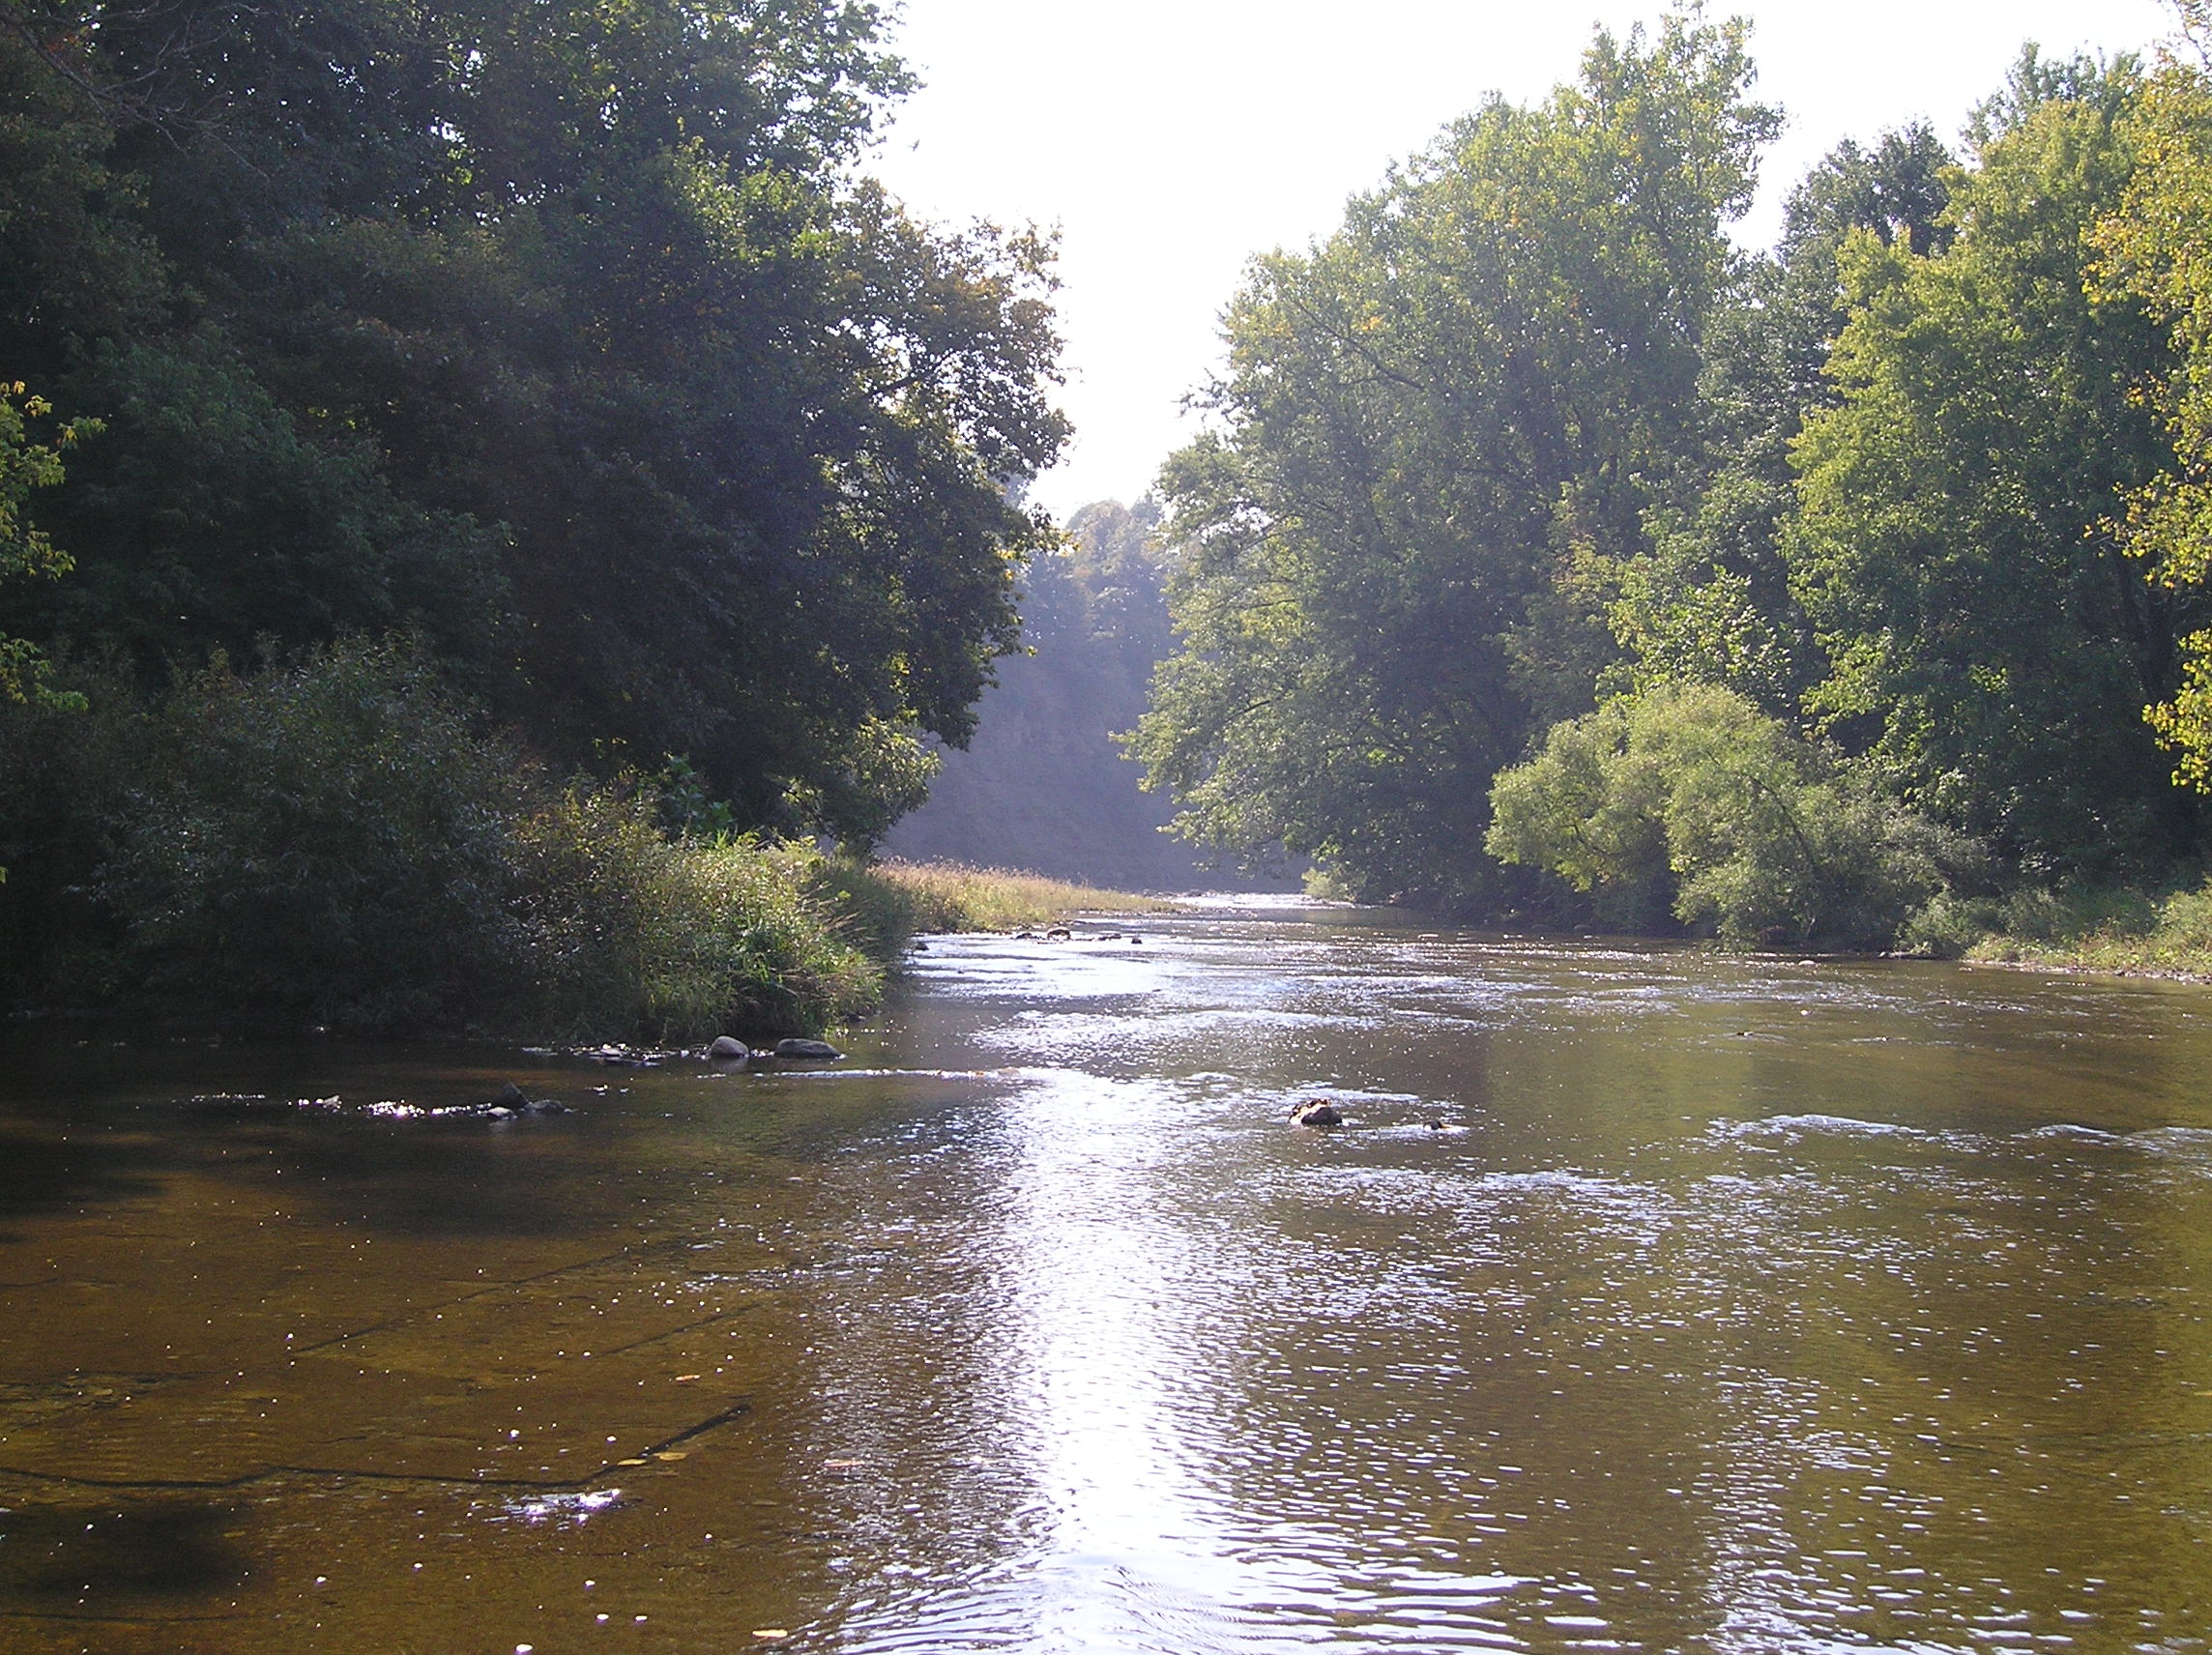 In the river photo